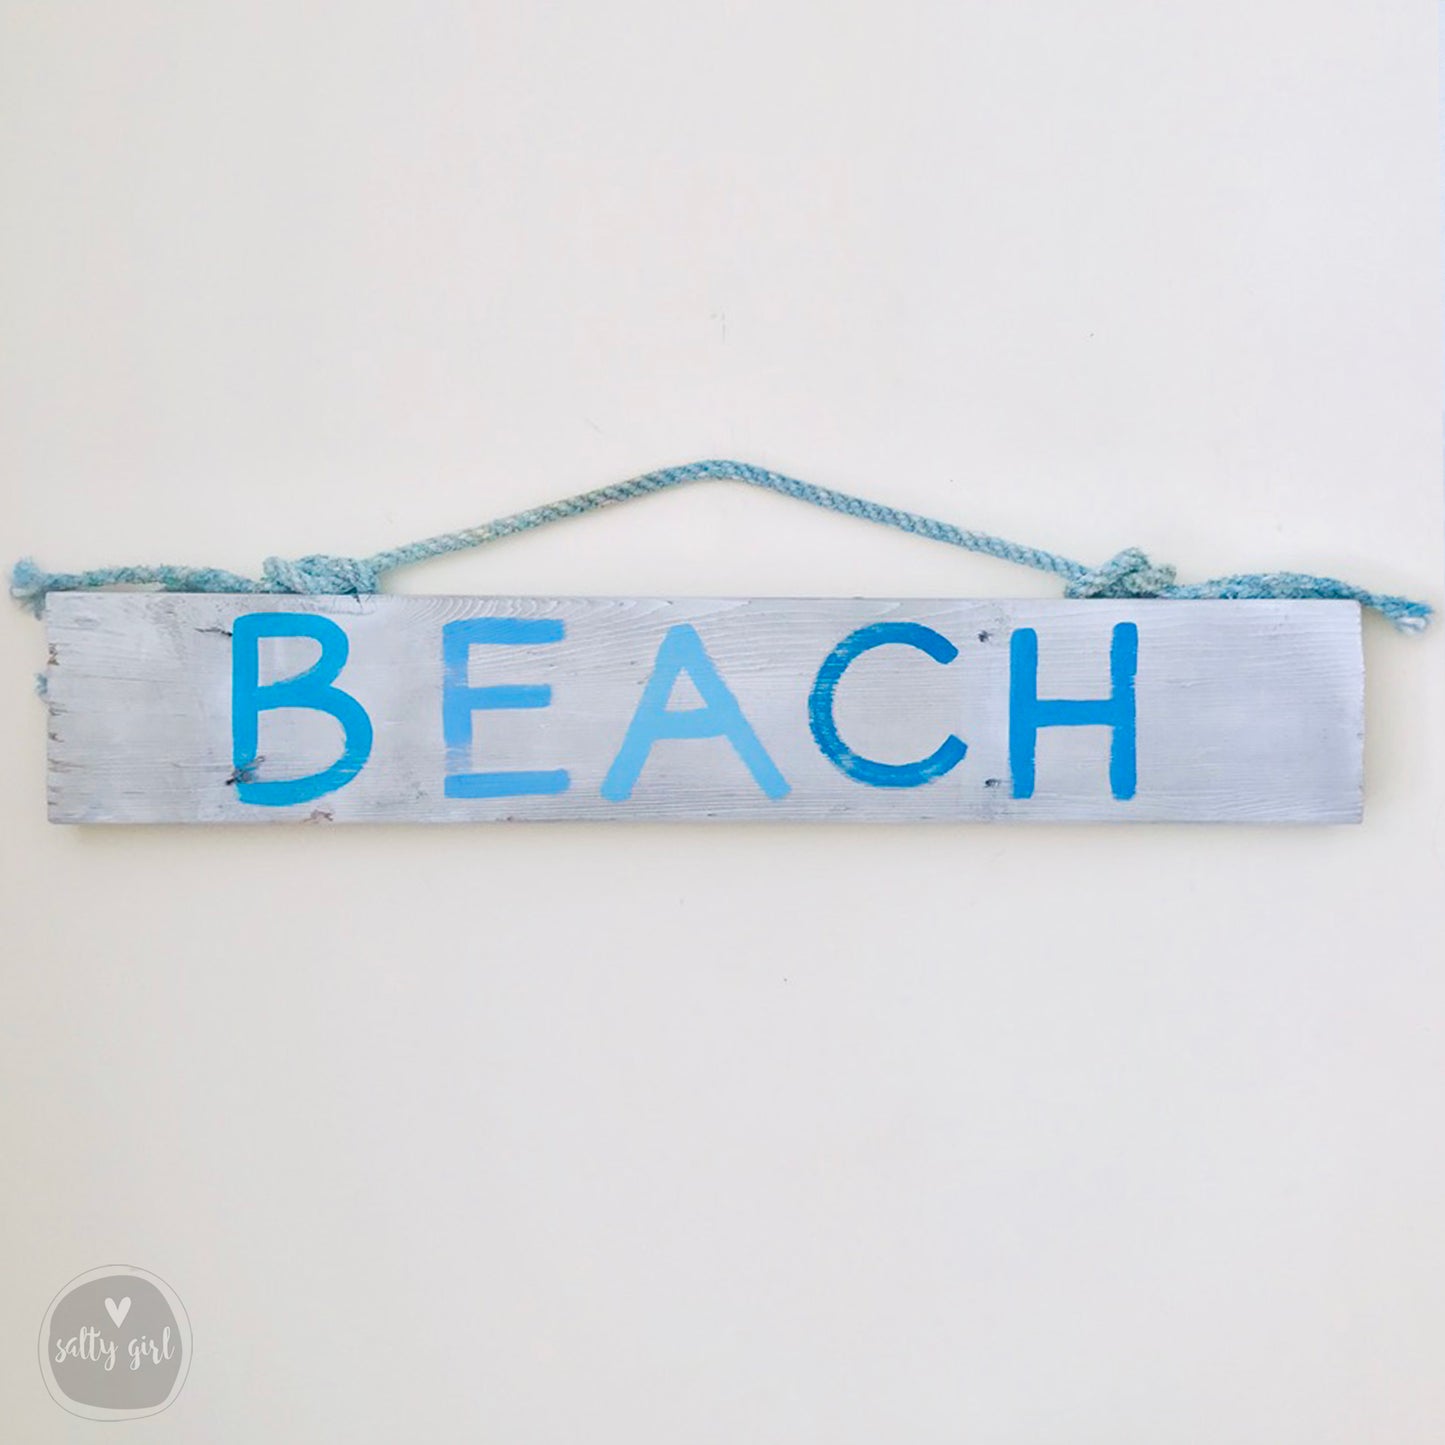 Beachside Bait Wood Sign, Custom Beach Location Fishing Supply Sign,  Distressed Shop Decor - Rustic Hand Made Vintage Wooden Sign Decoration